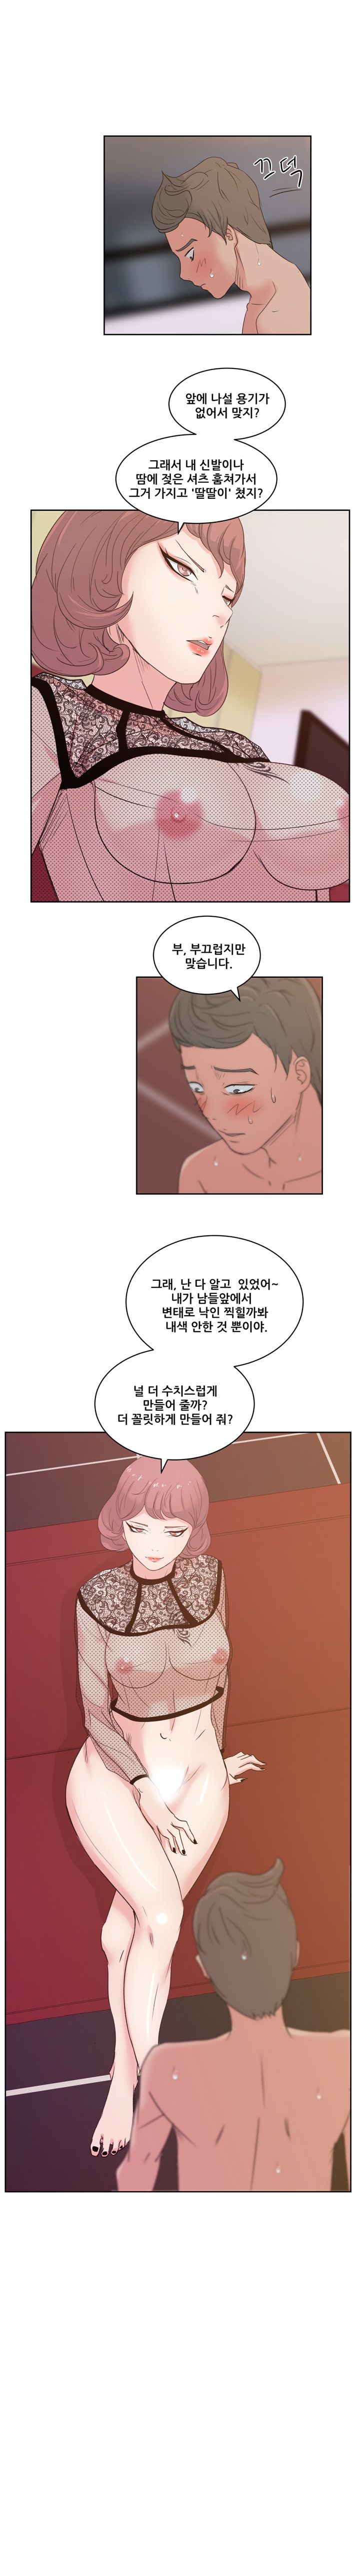 Sooyung Comic Shop Raw - Chapter 9 Page 5